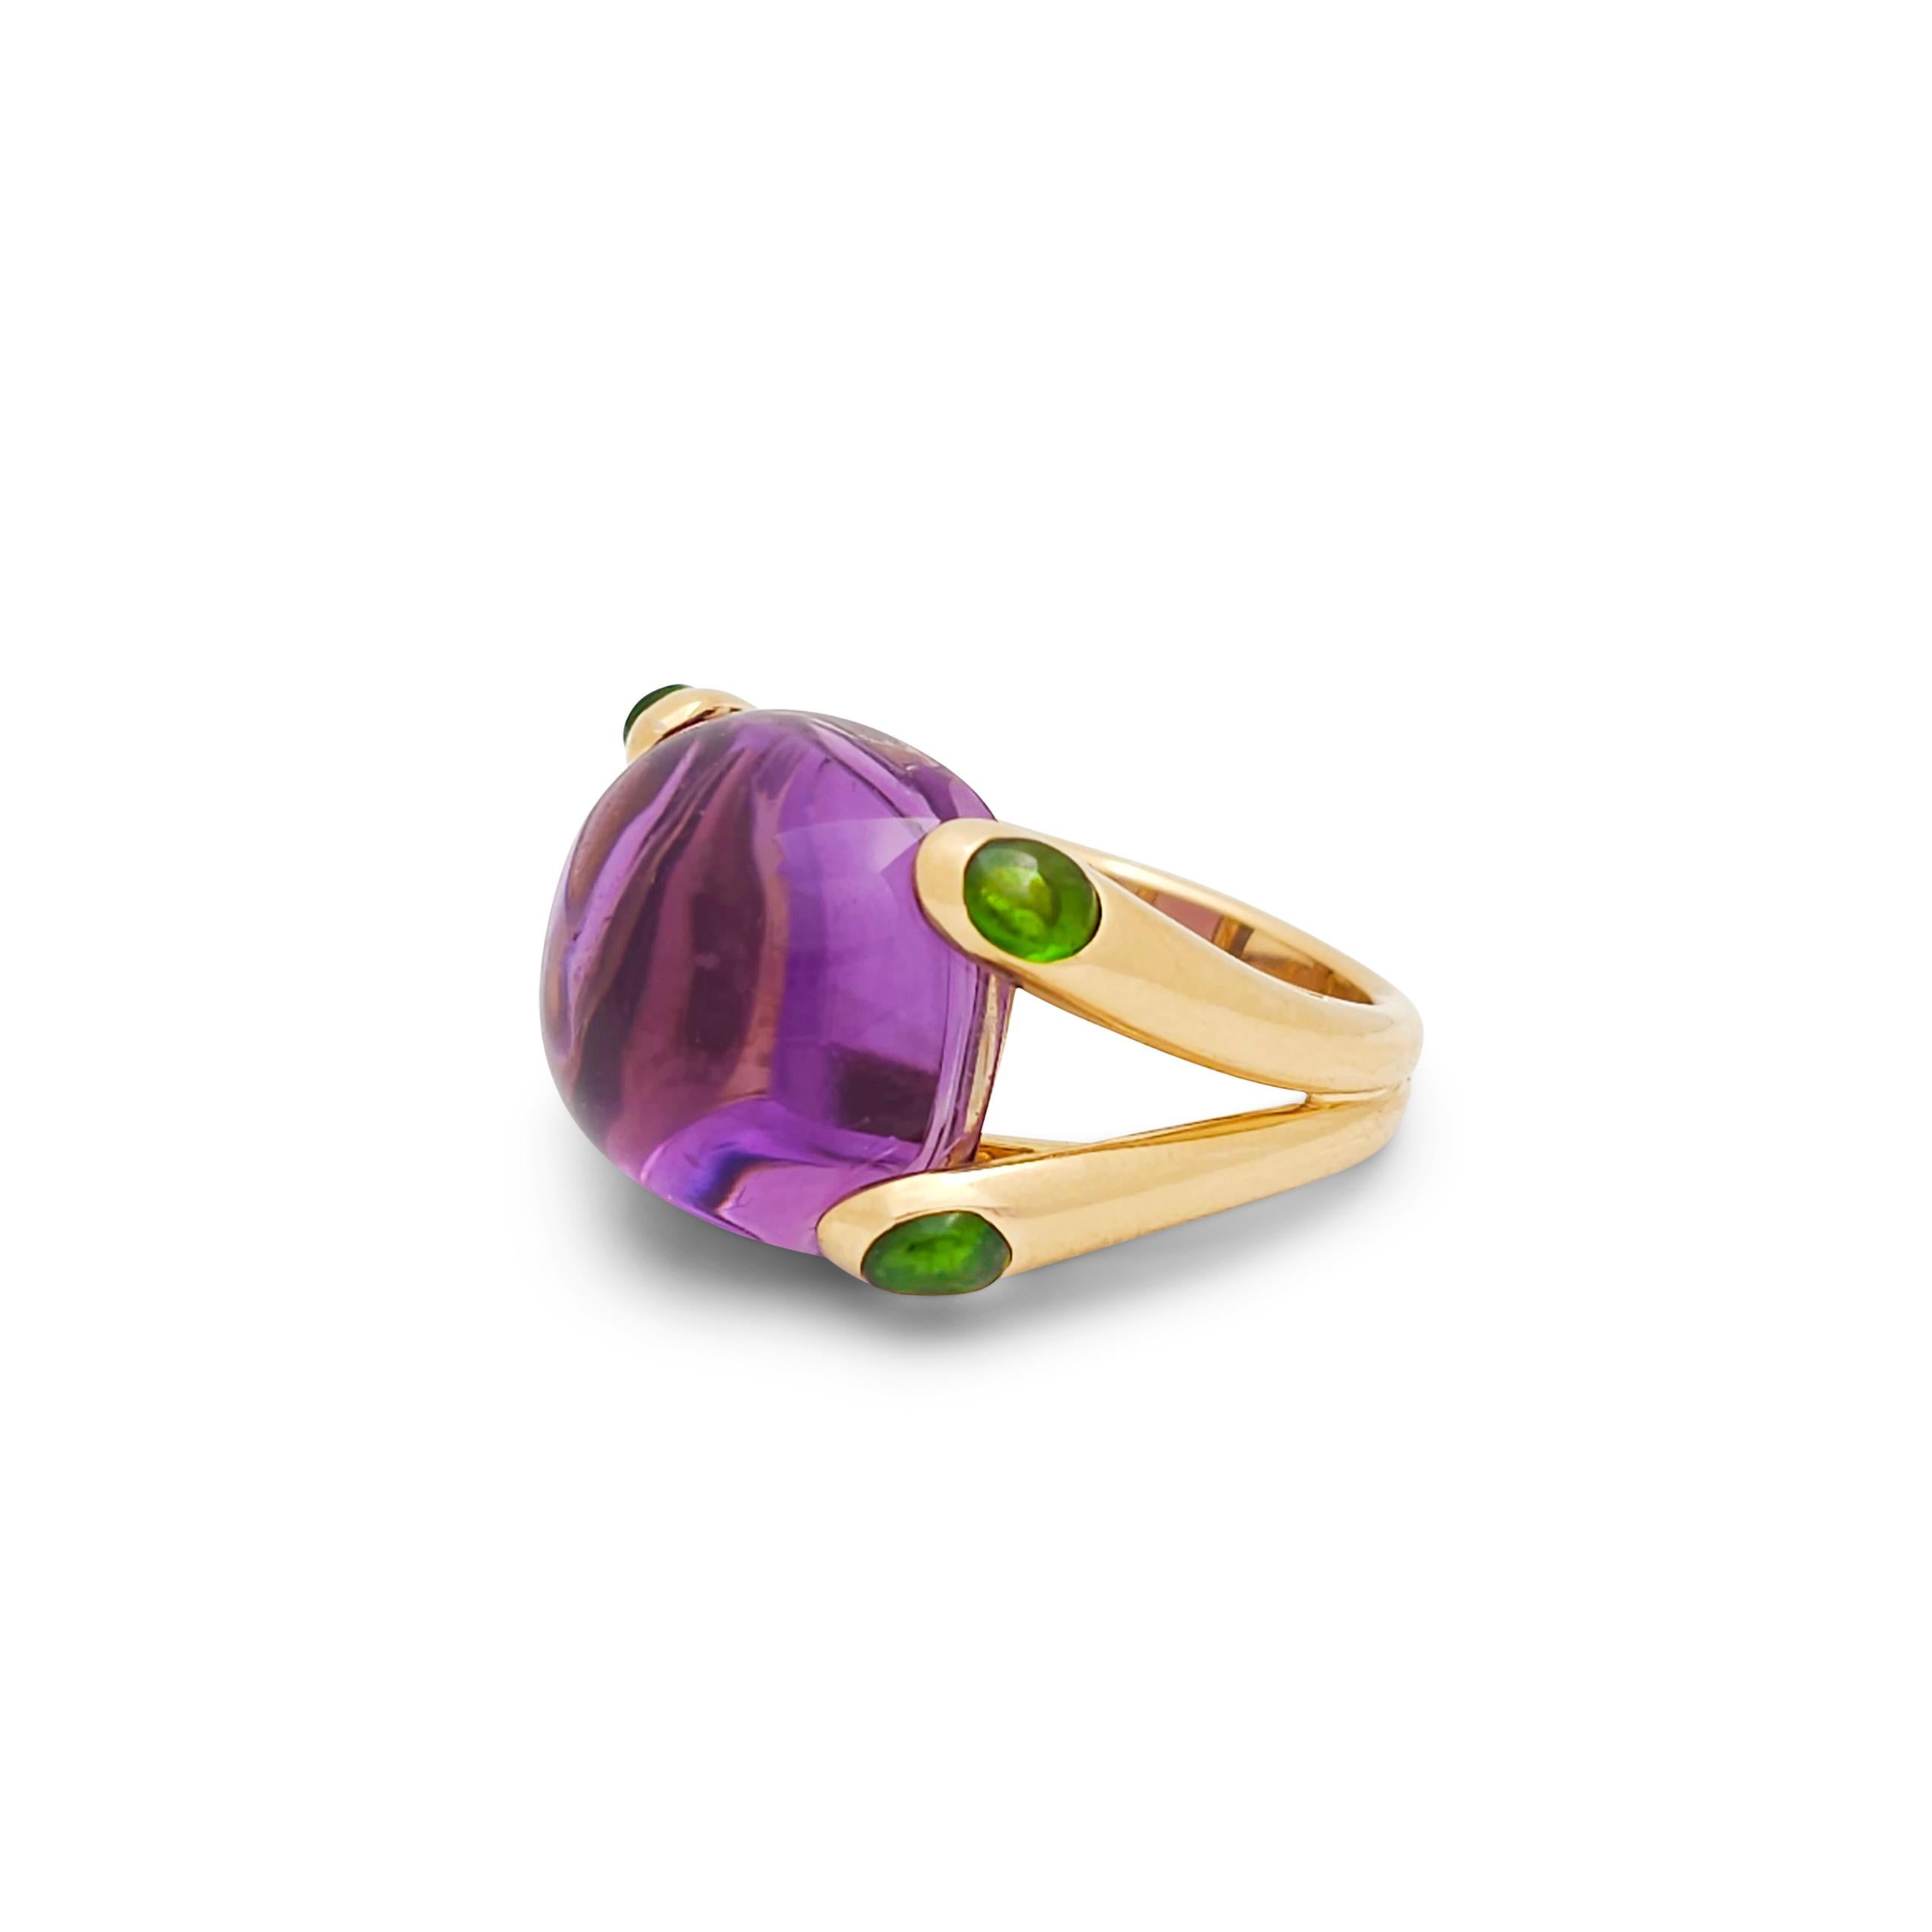 Authentic Verdura 'Candy' ring is one of Fulco di Verdura's earliest and most iconic designs. Crafted in 18 karat yellow gold, the ring centers on a lilac-hued cushion-shaped cabochon amethyst stone that is cornered by four contrasting tourmaline